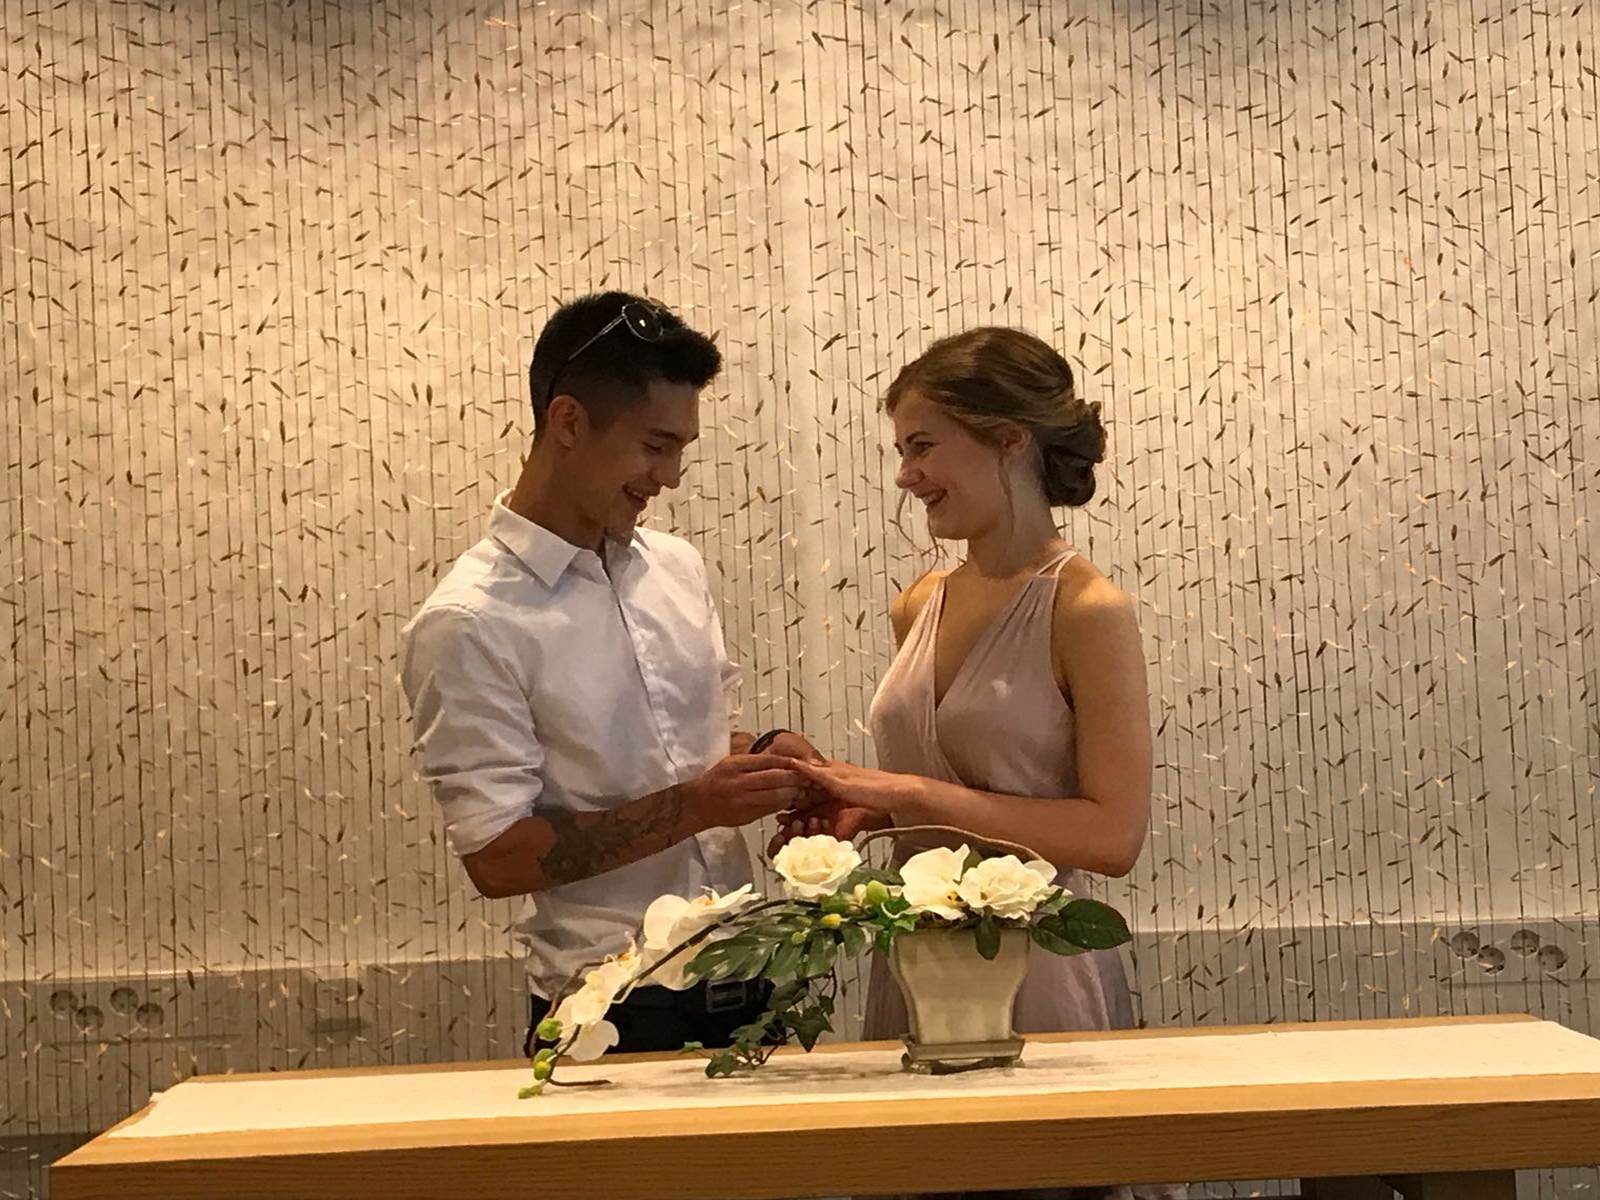 Joshua and his wife Venla's wedding in Finland in 2018